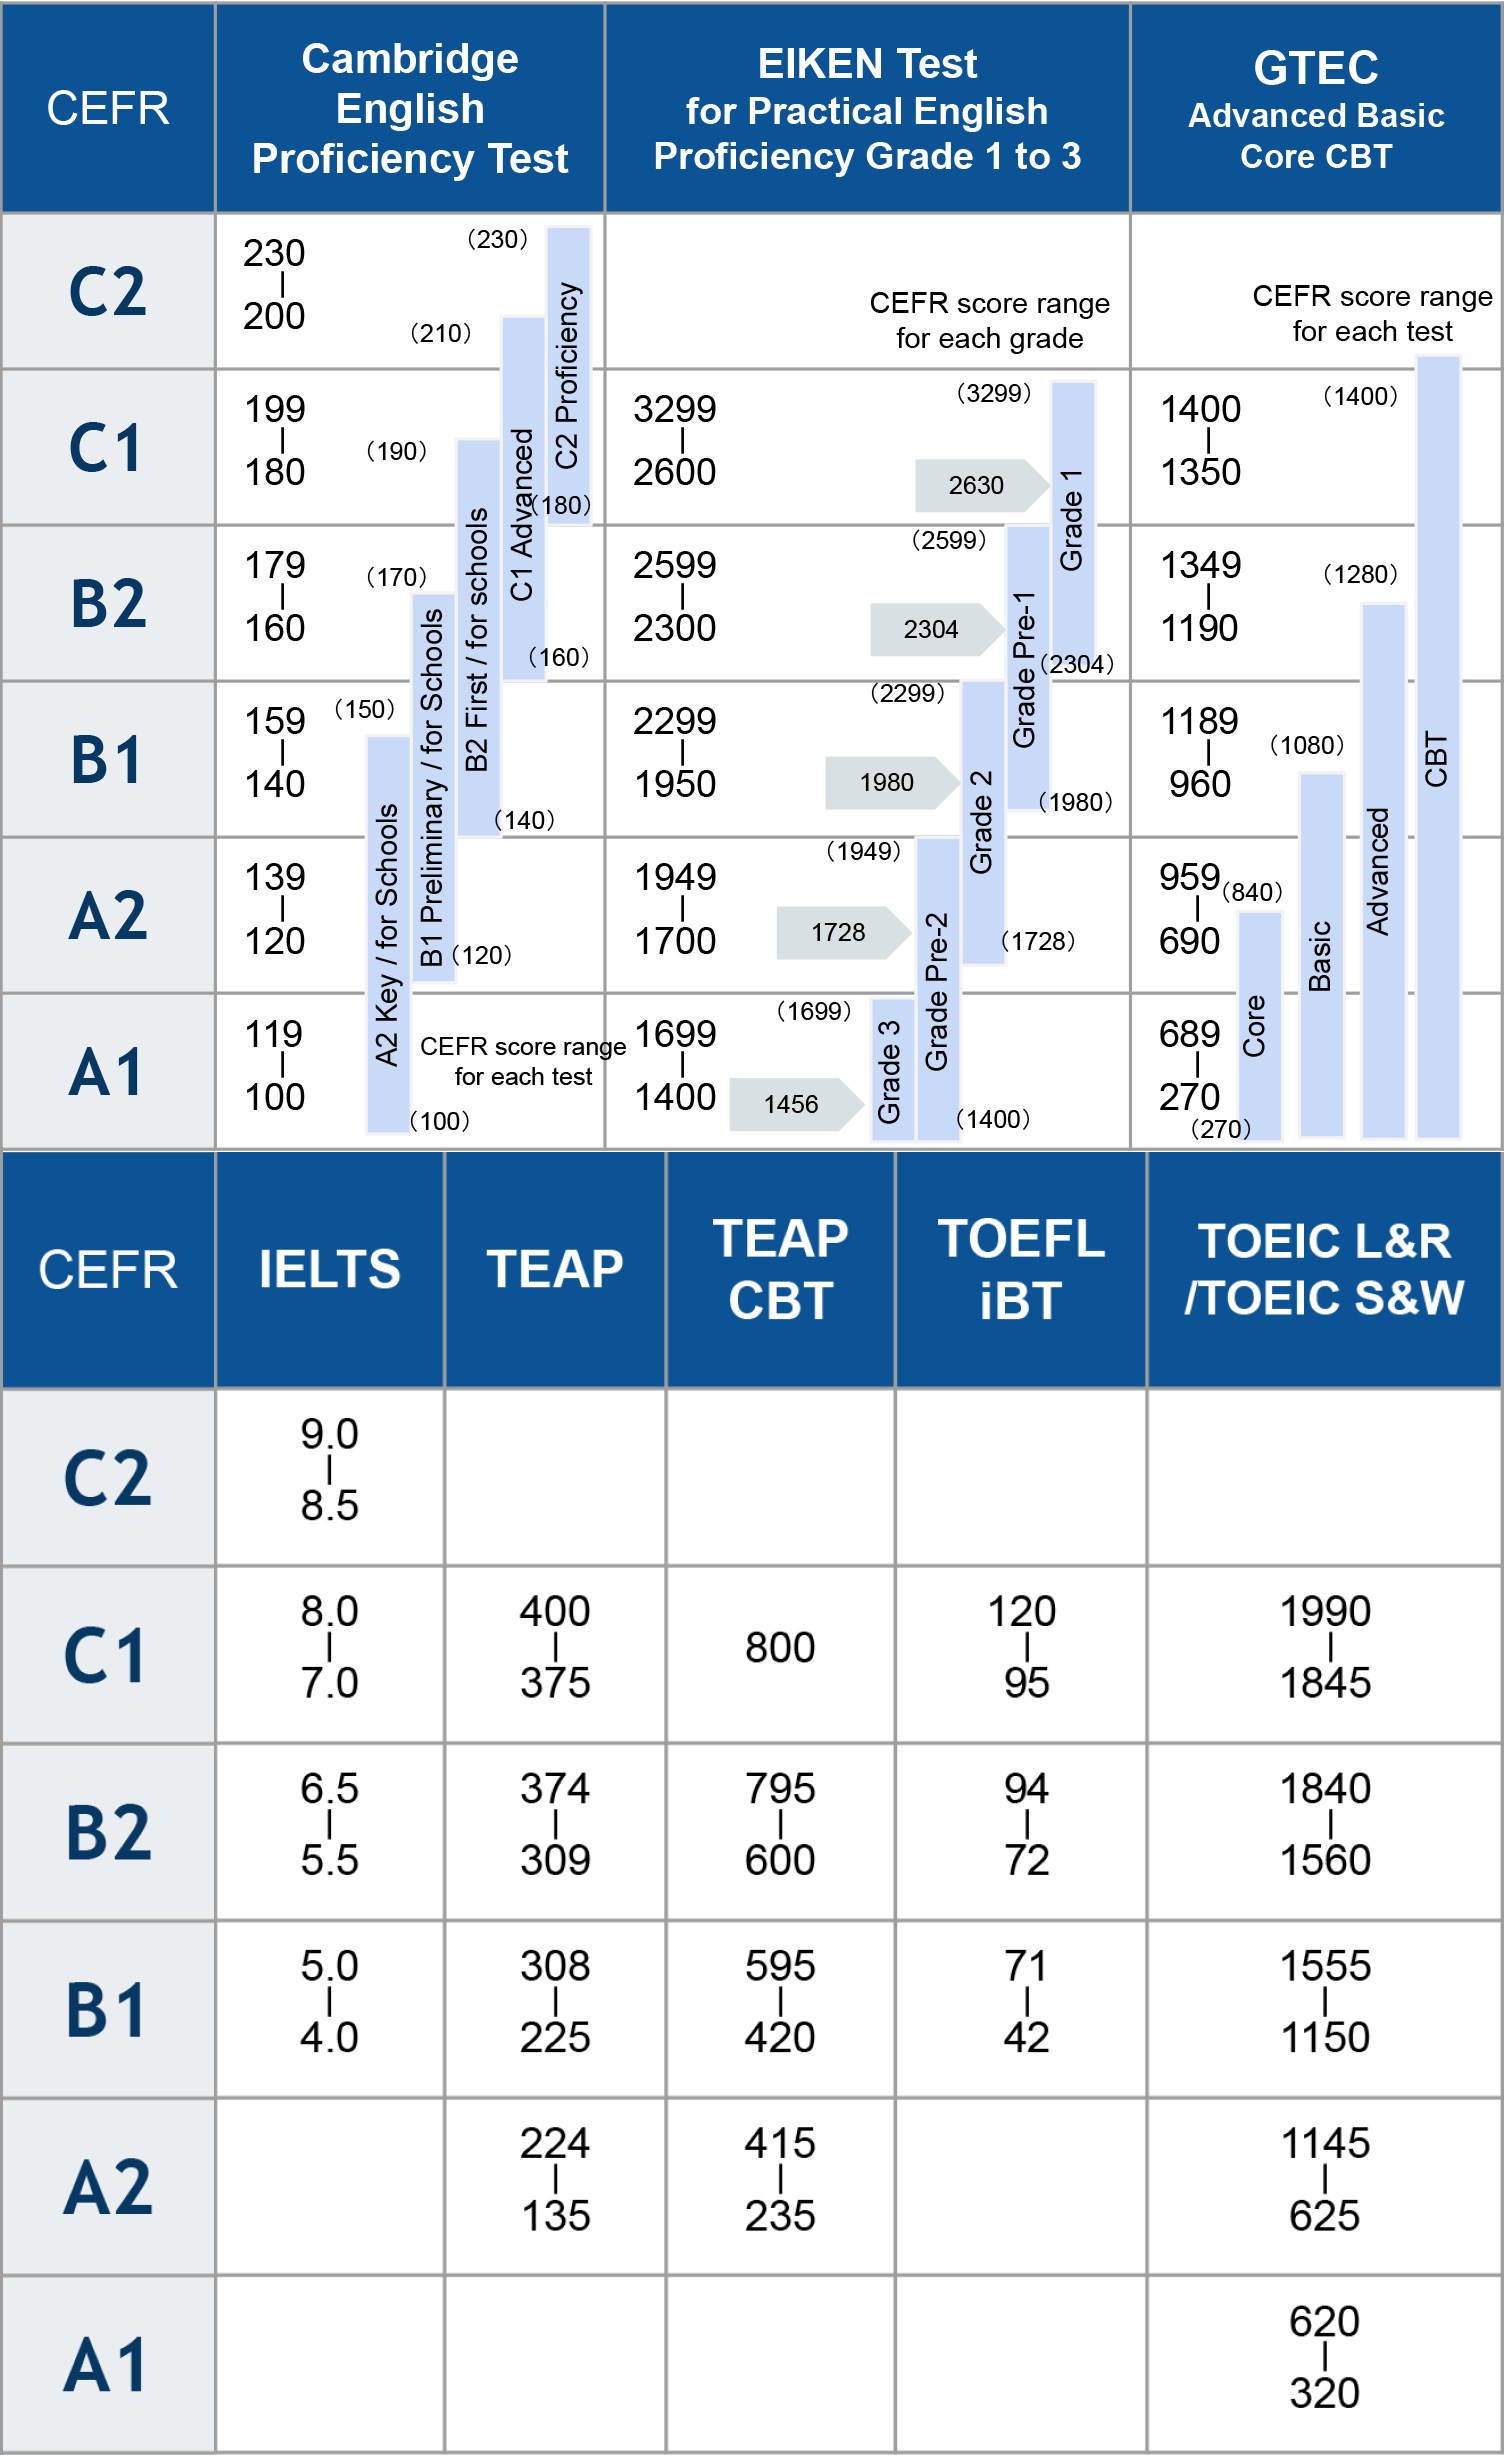 Comparison of qualifications and examinations(EIKEN, TOEIC, etc.) with the CEFR